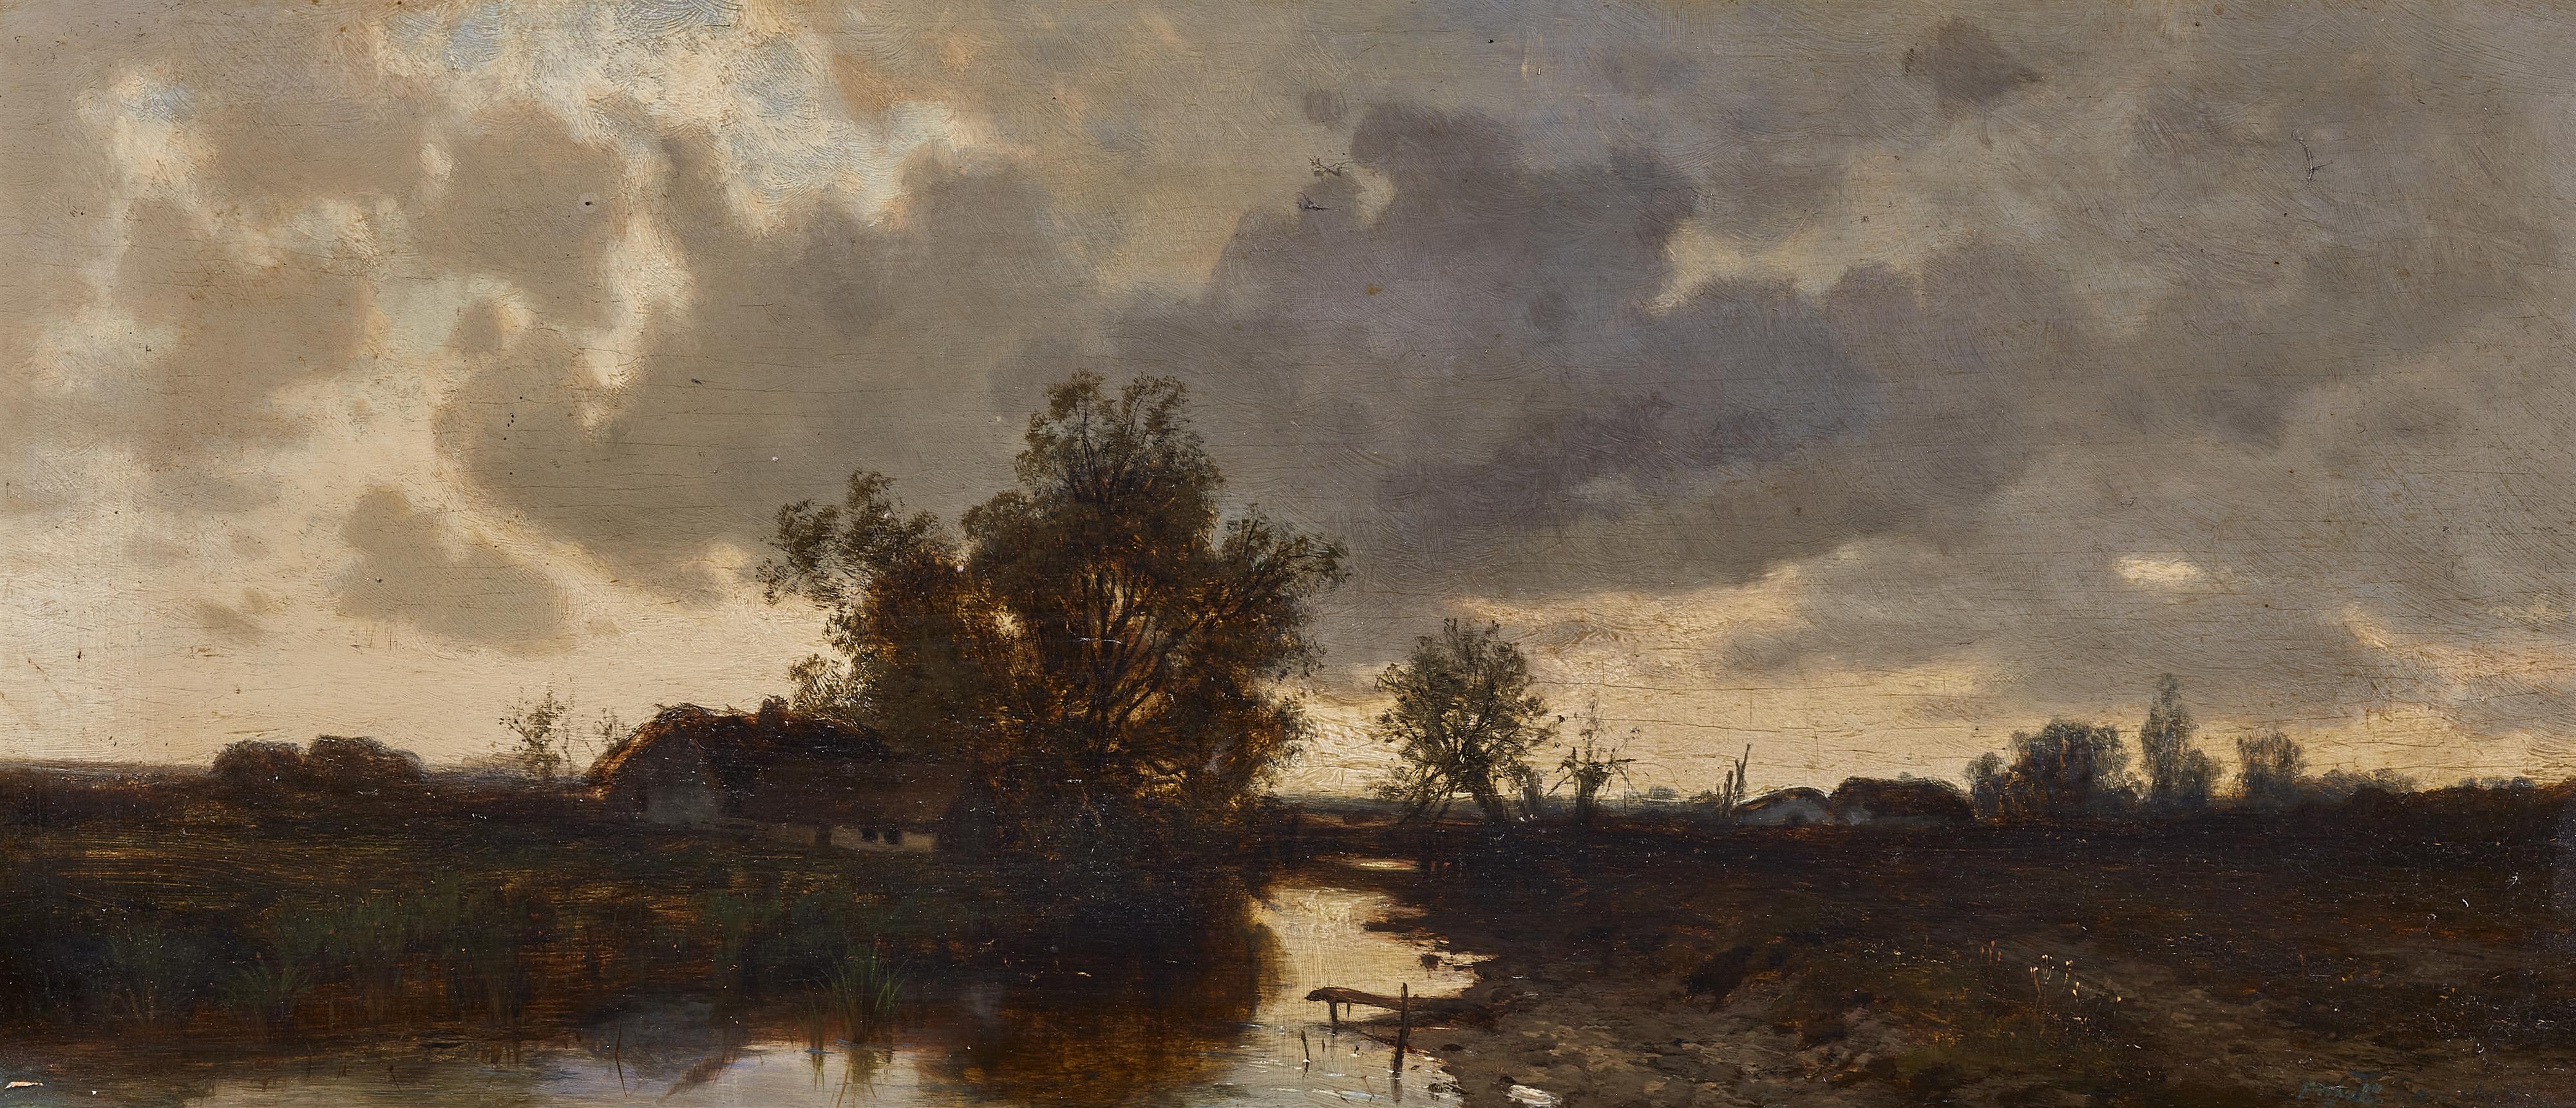 Théodore Rousseau - Landscape with Cottages by a Stream - image-1